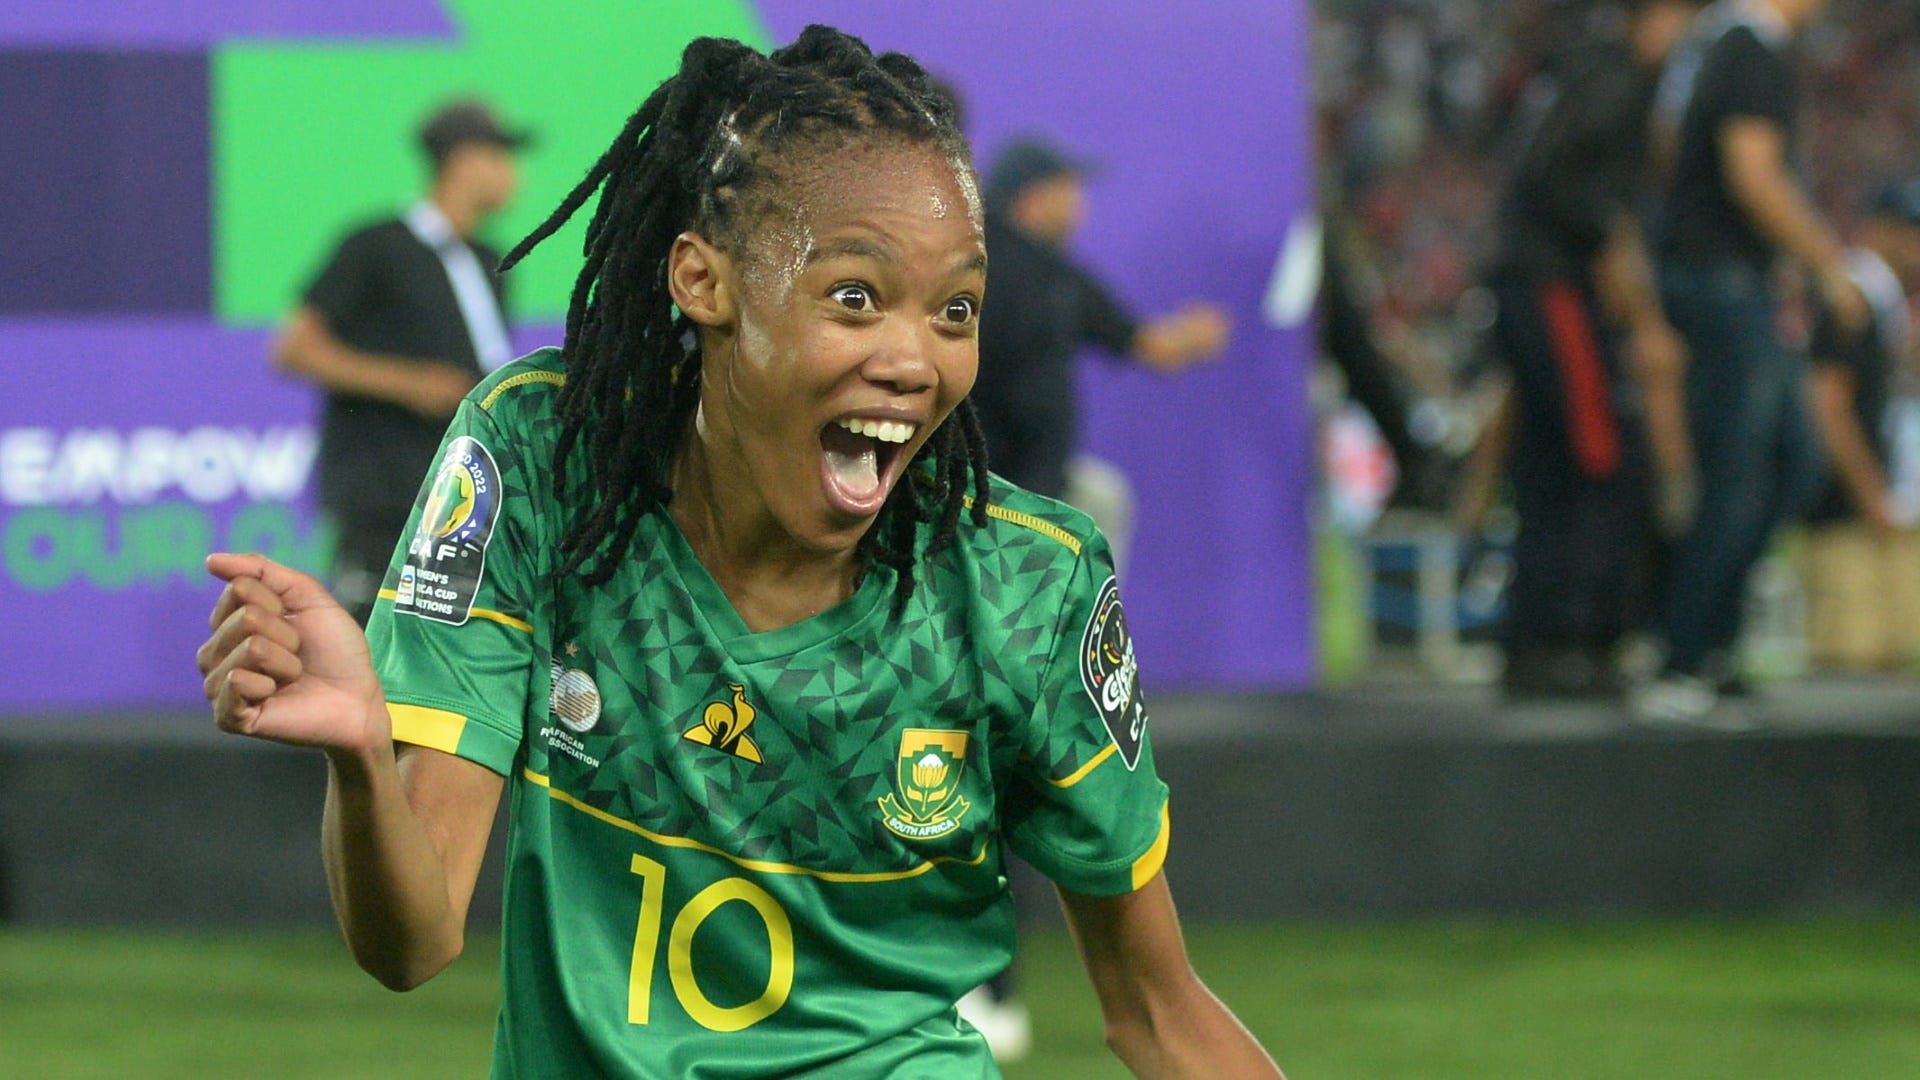 South Africa bids for 2027 Women’s World Cup